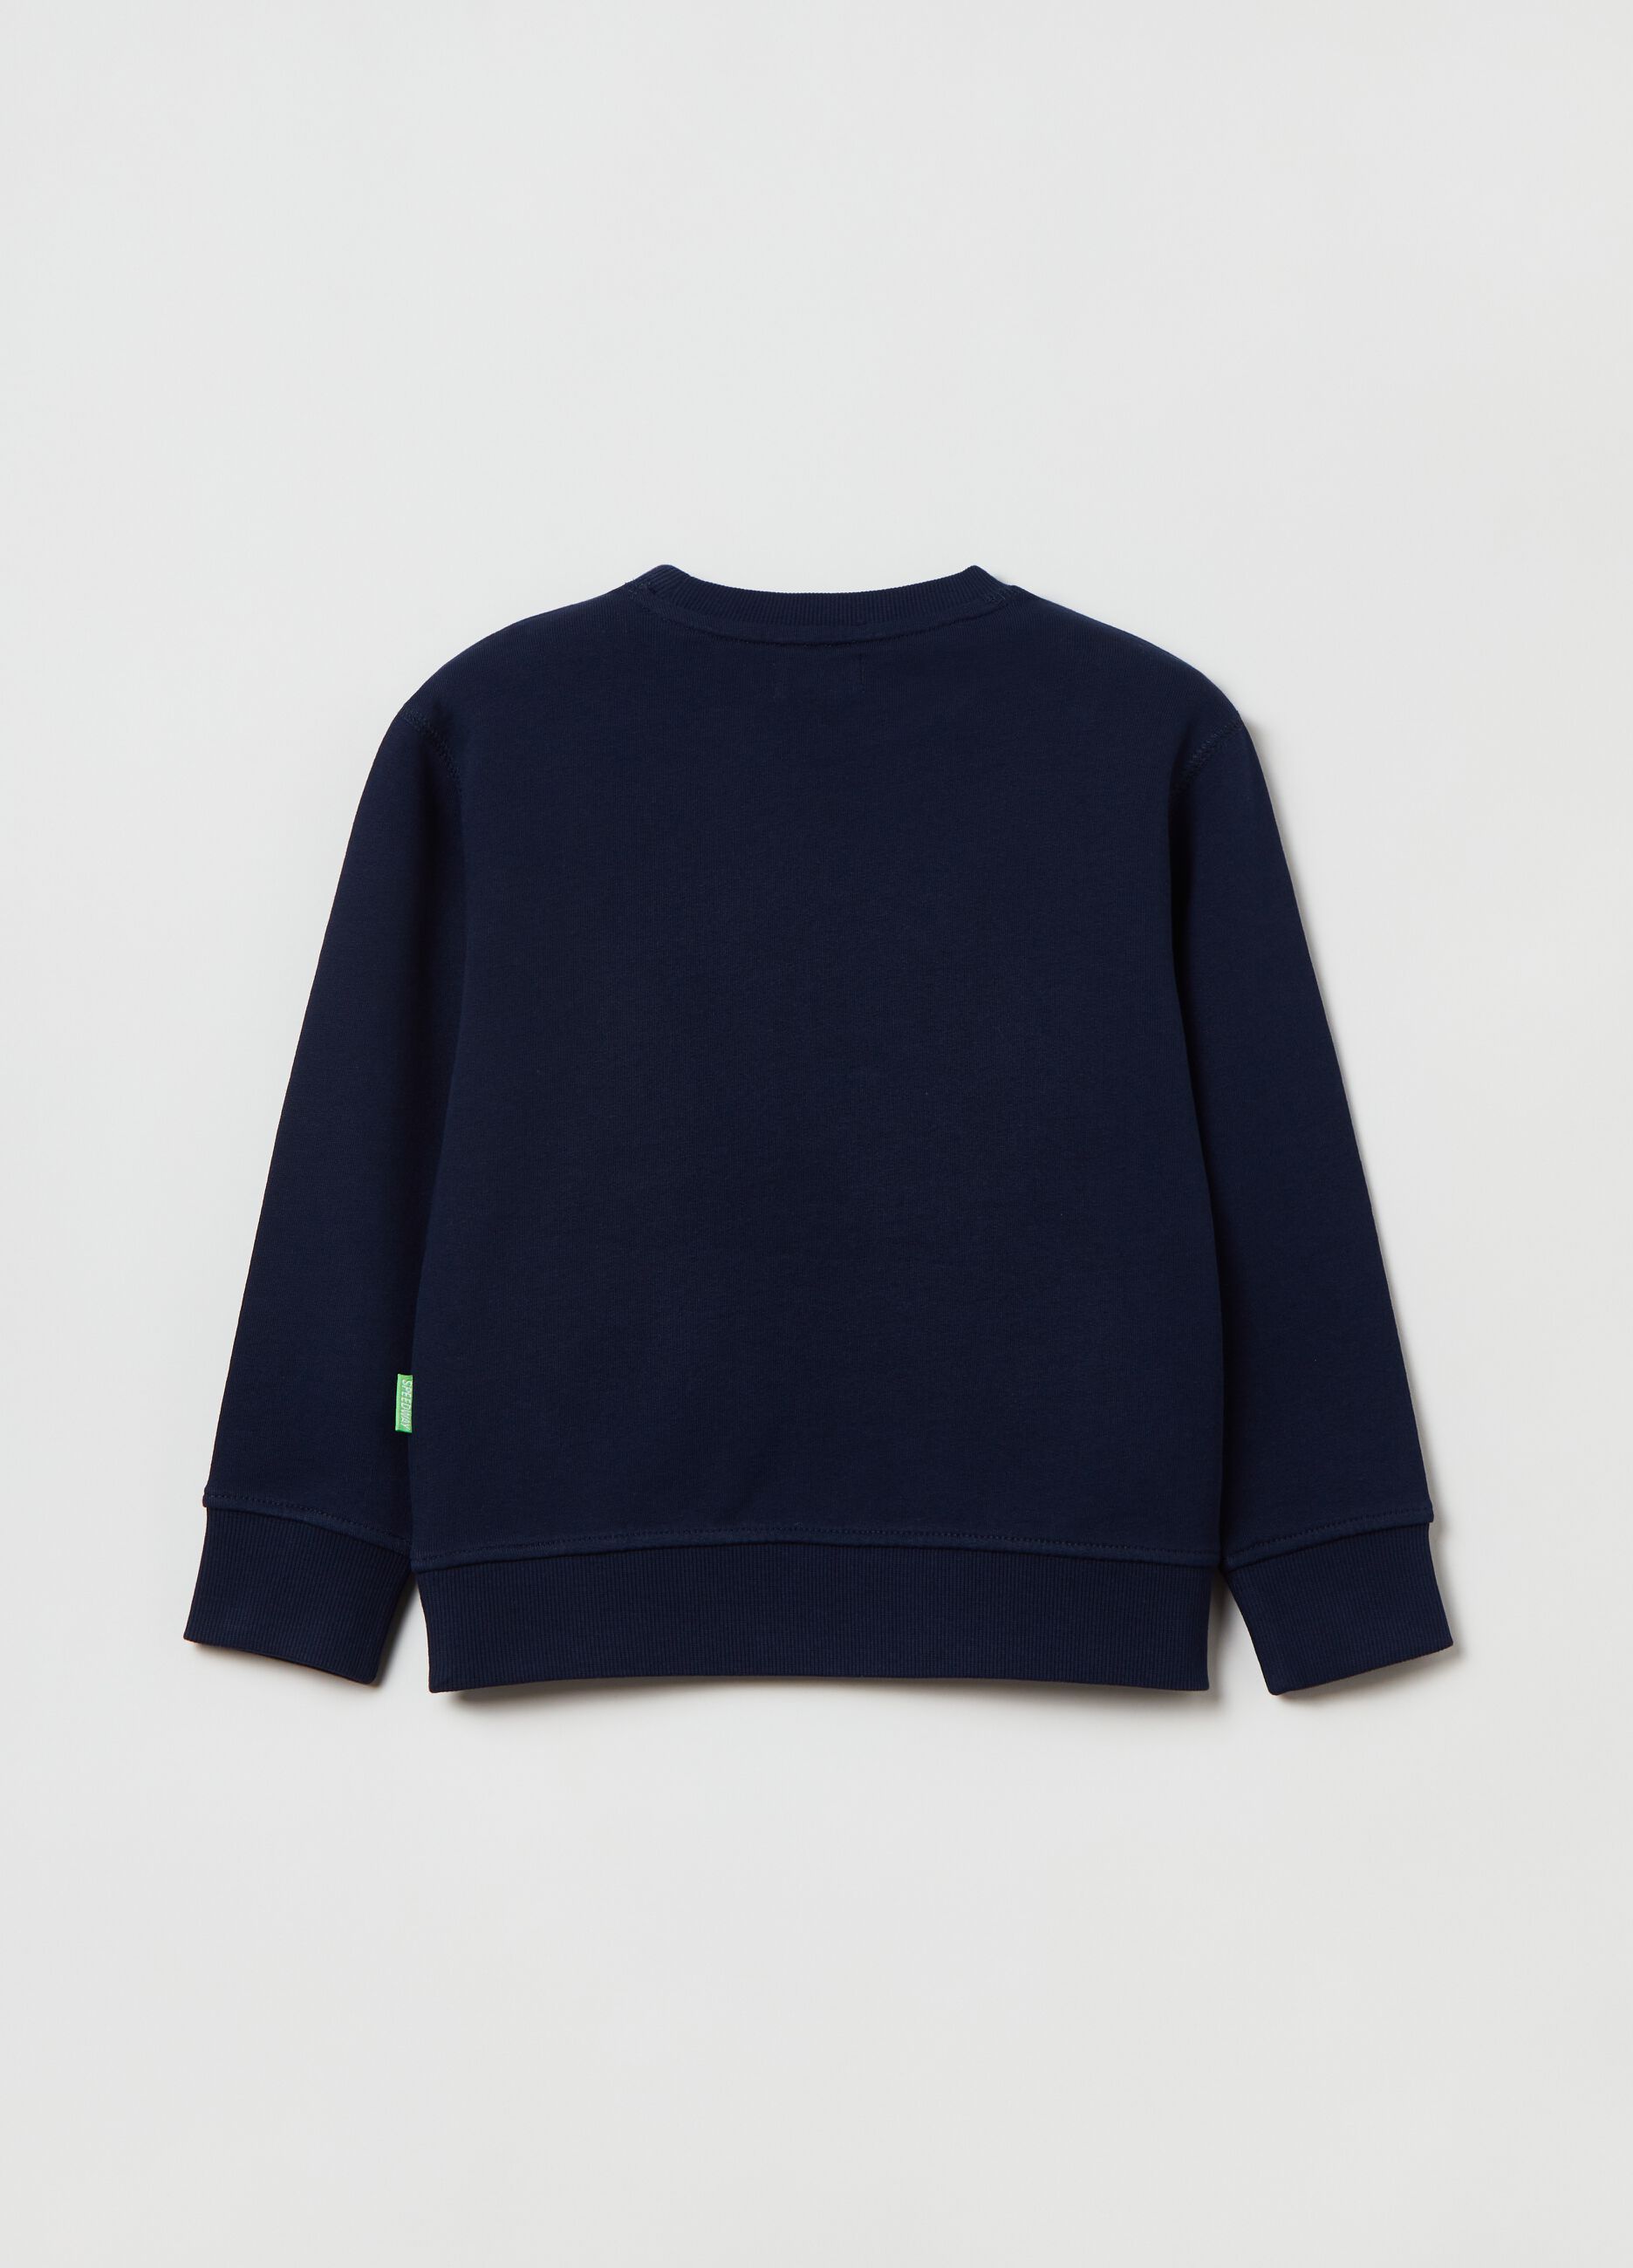 French terry sweatshirt with pocket